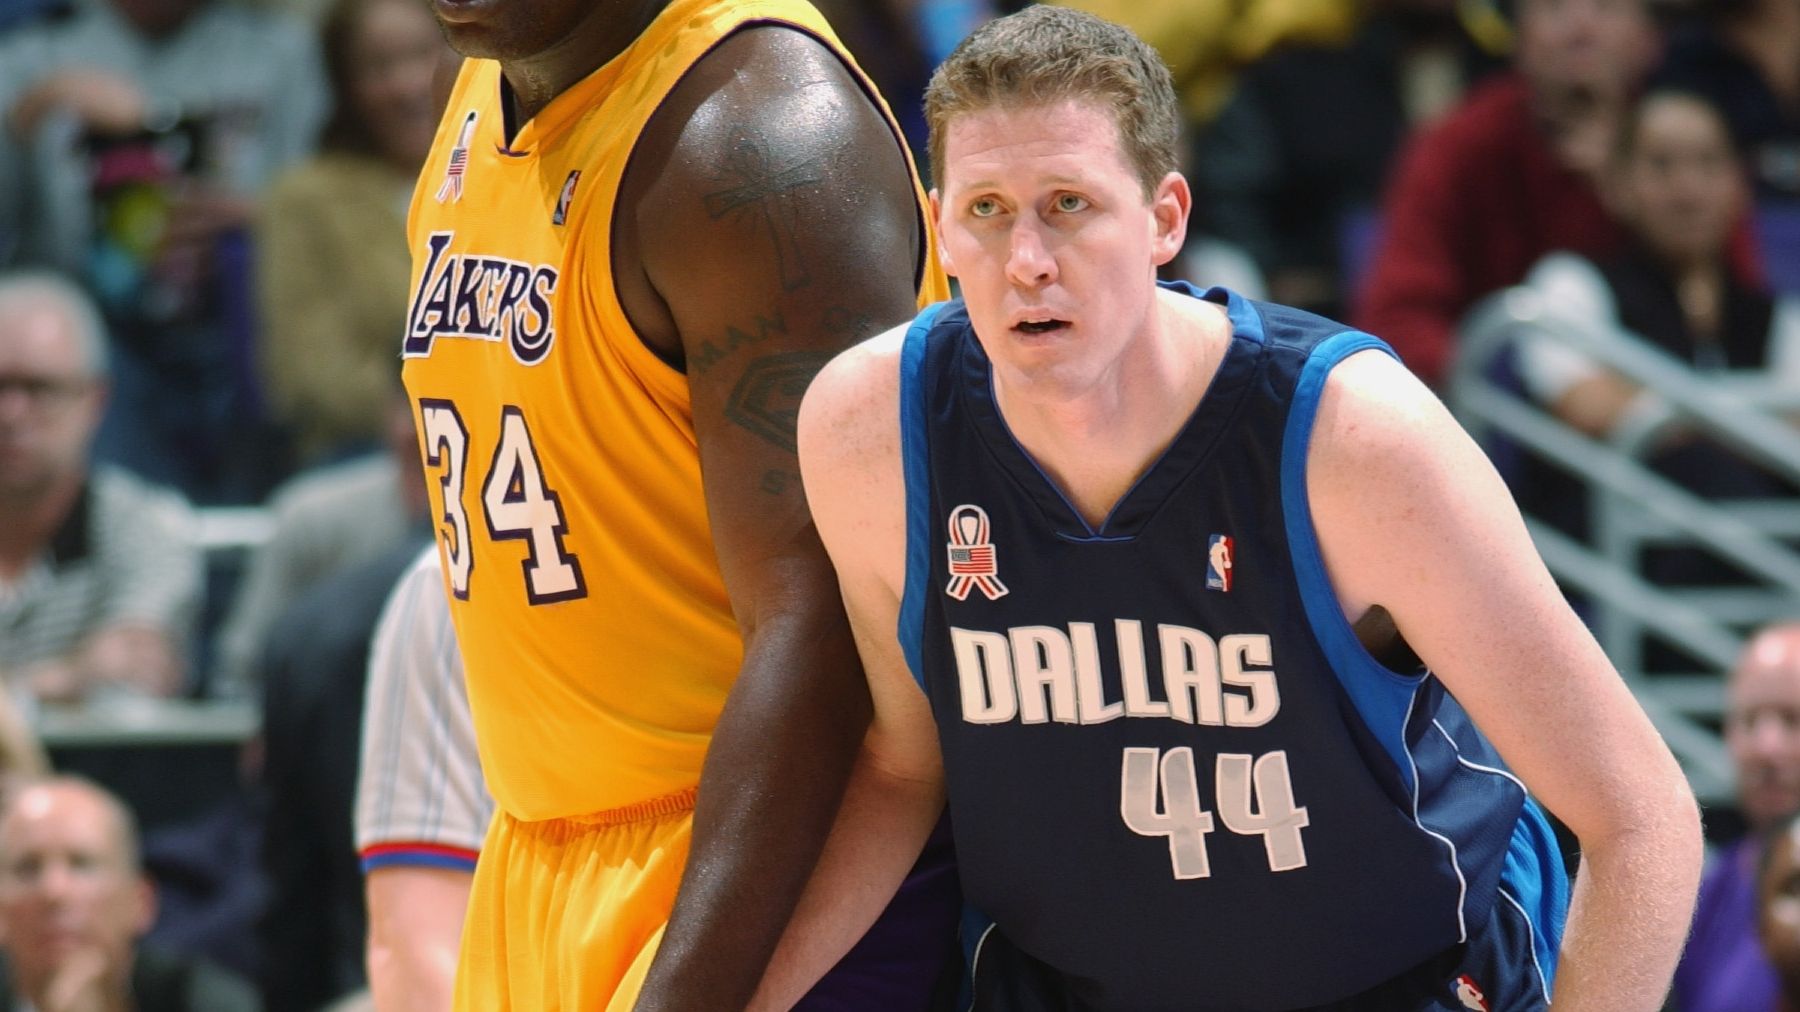 Shawn Bradley on Aftermath of Bike Accident That Paralyzed Him